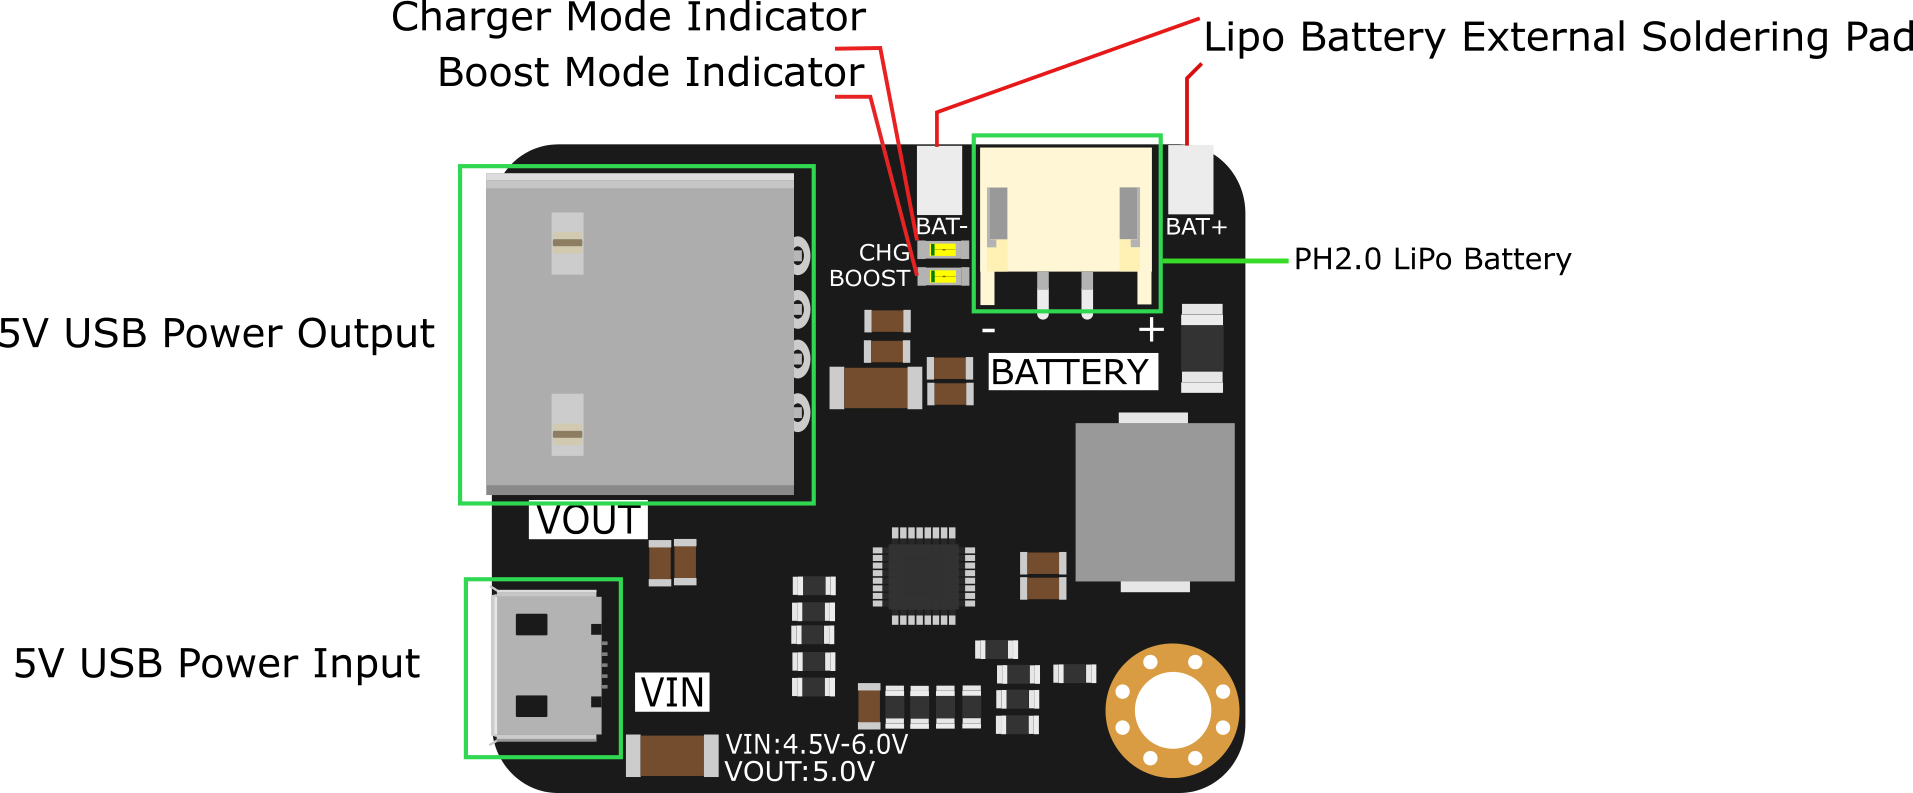 Lithium Ion battery to 5V 1A battery pack module only outputting